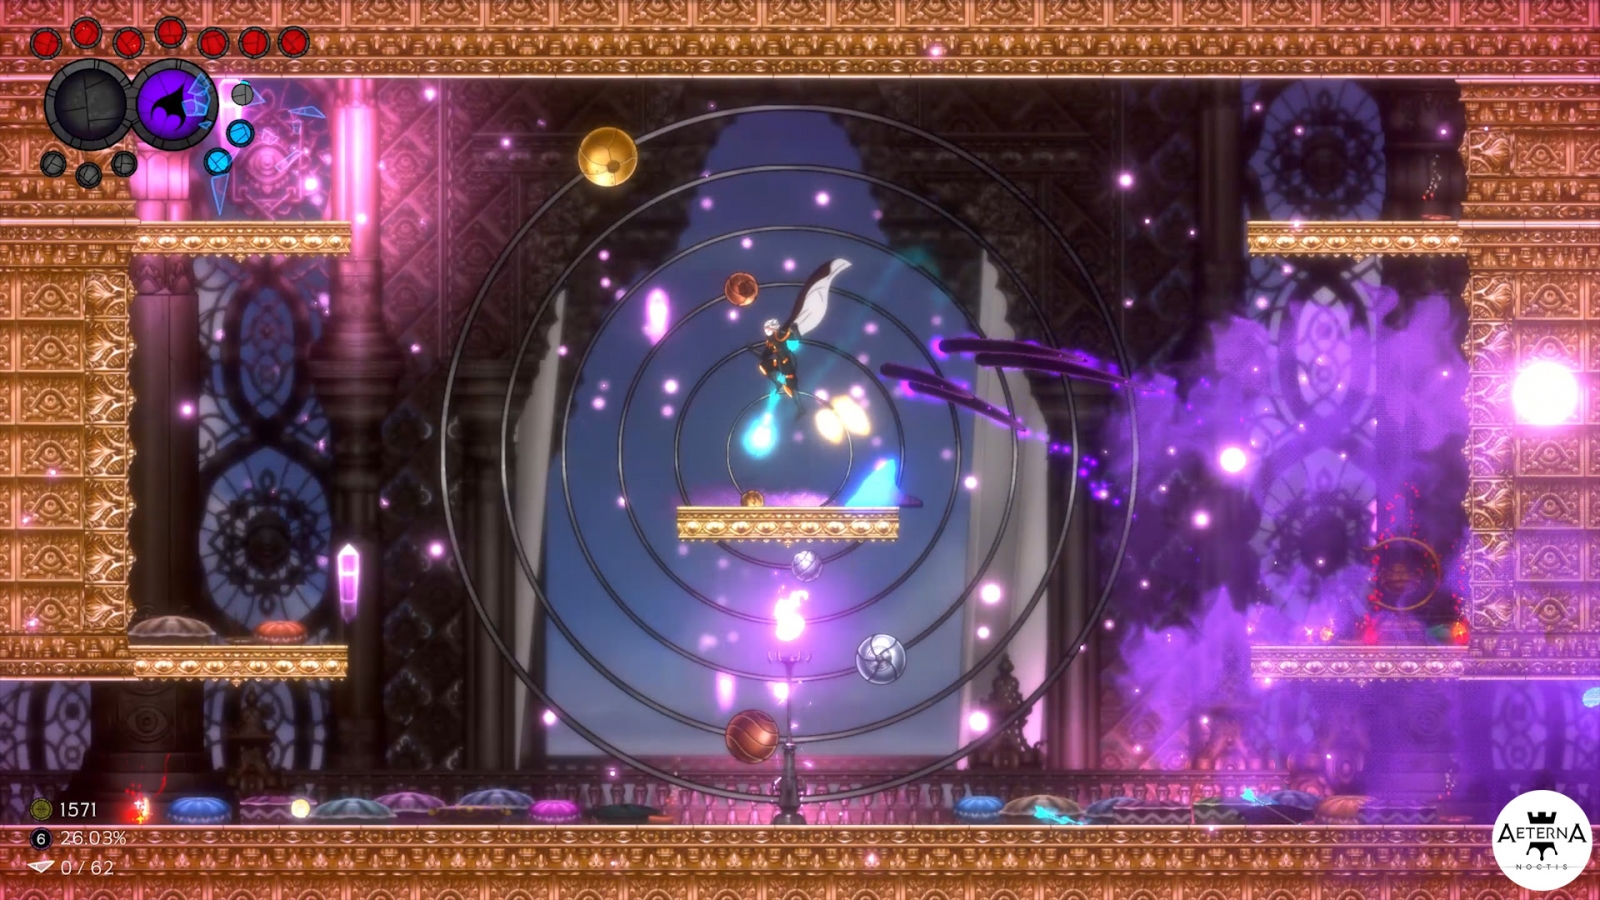 Aeterna Noctis, a beautiful new Metroidvania, releases a new trailer, screen shots, and pricing details